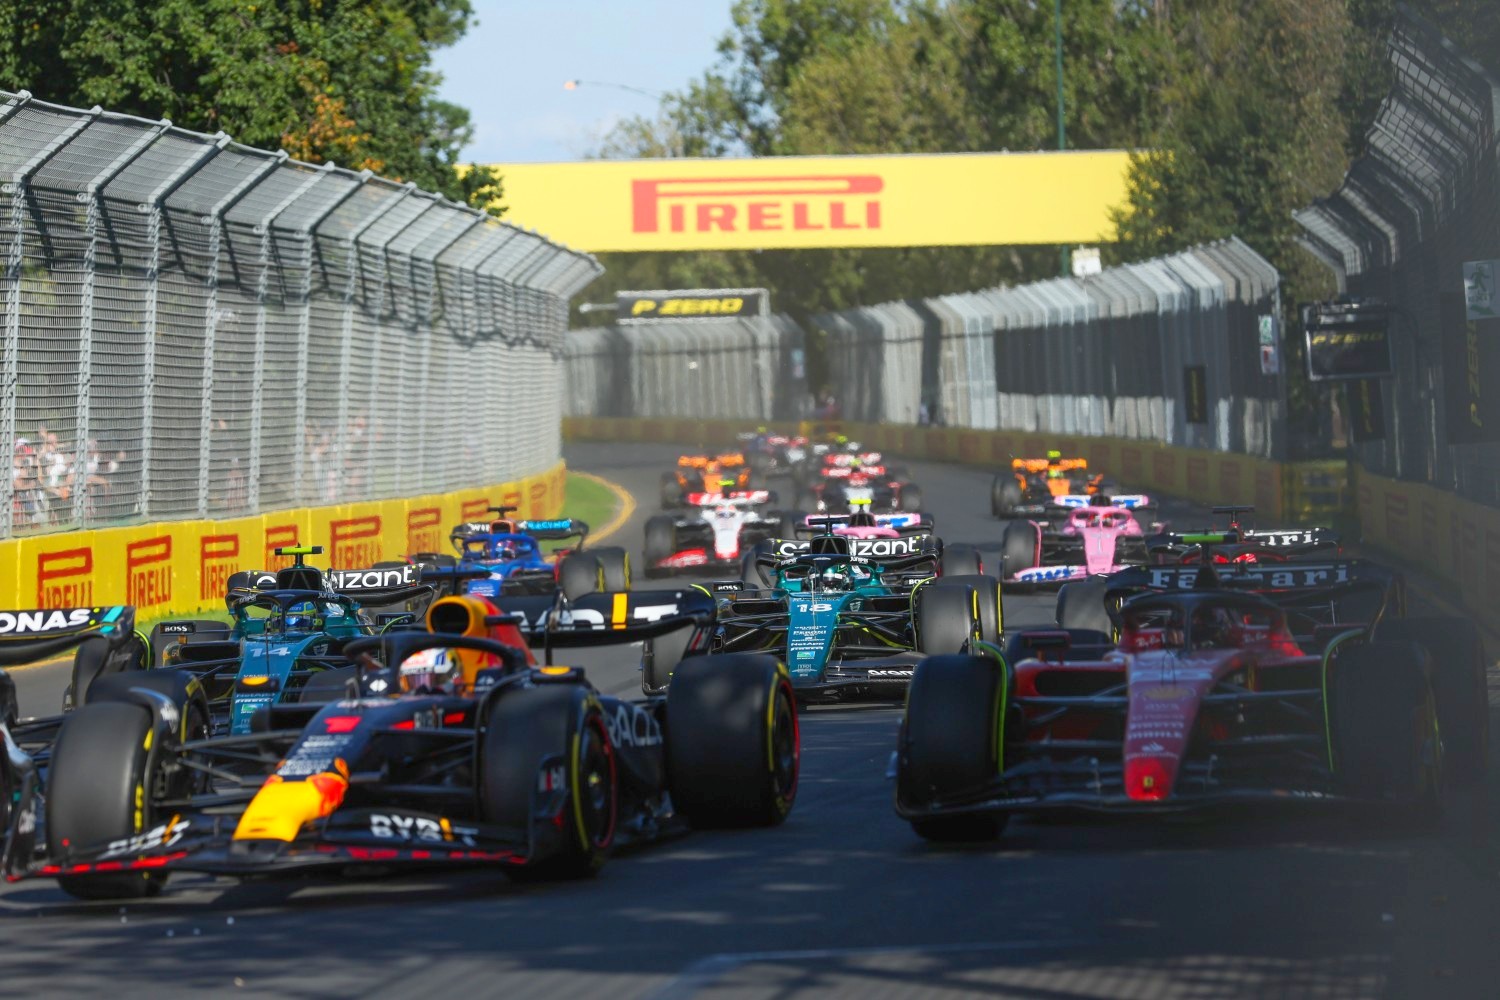 Max Verstappen, Red Bull Racing RB19, leads Carlos Sainz, Ferrari SF-23, Fernando Alonso, Aston Martin AMR23, Lance Stroll, Aston Martin AMR23, and the remainder of the field during the Australian GP at Melbourne Grand Prix Circuit on Sunday April 02, 2023 in Melbourne, Australia. (Photo by Lionel Ng / LAT Images)